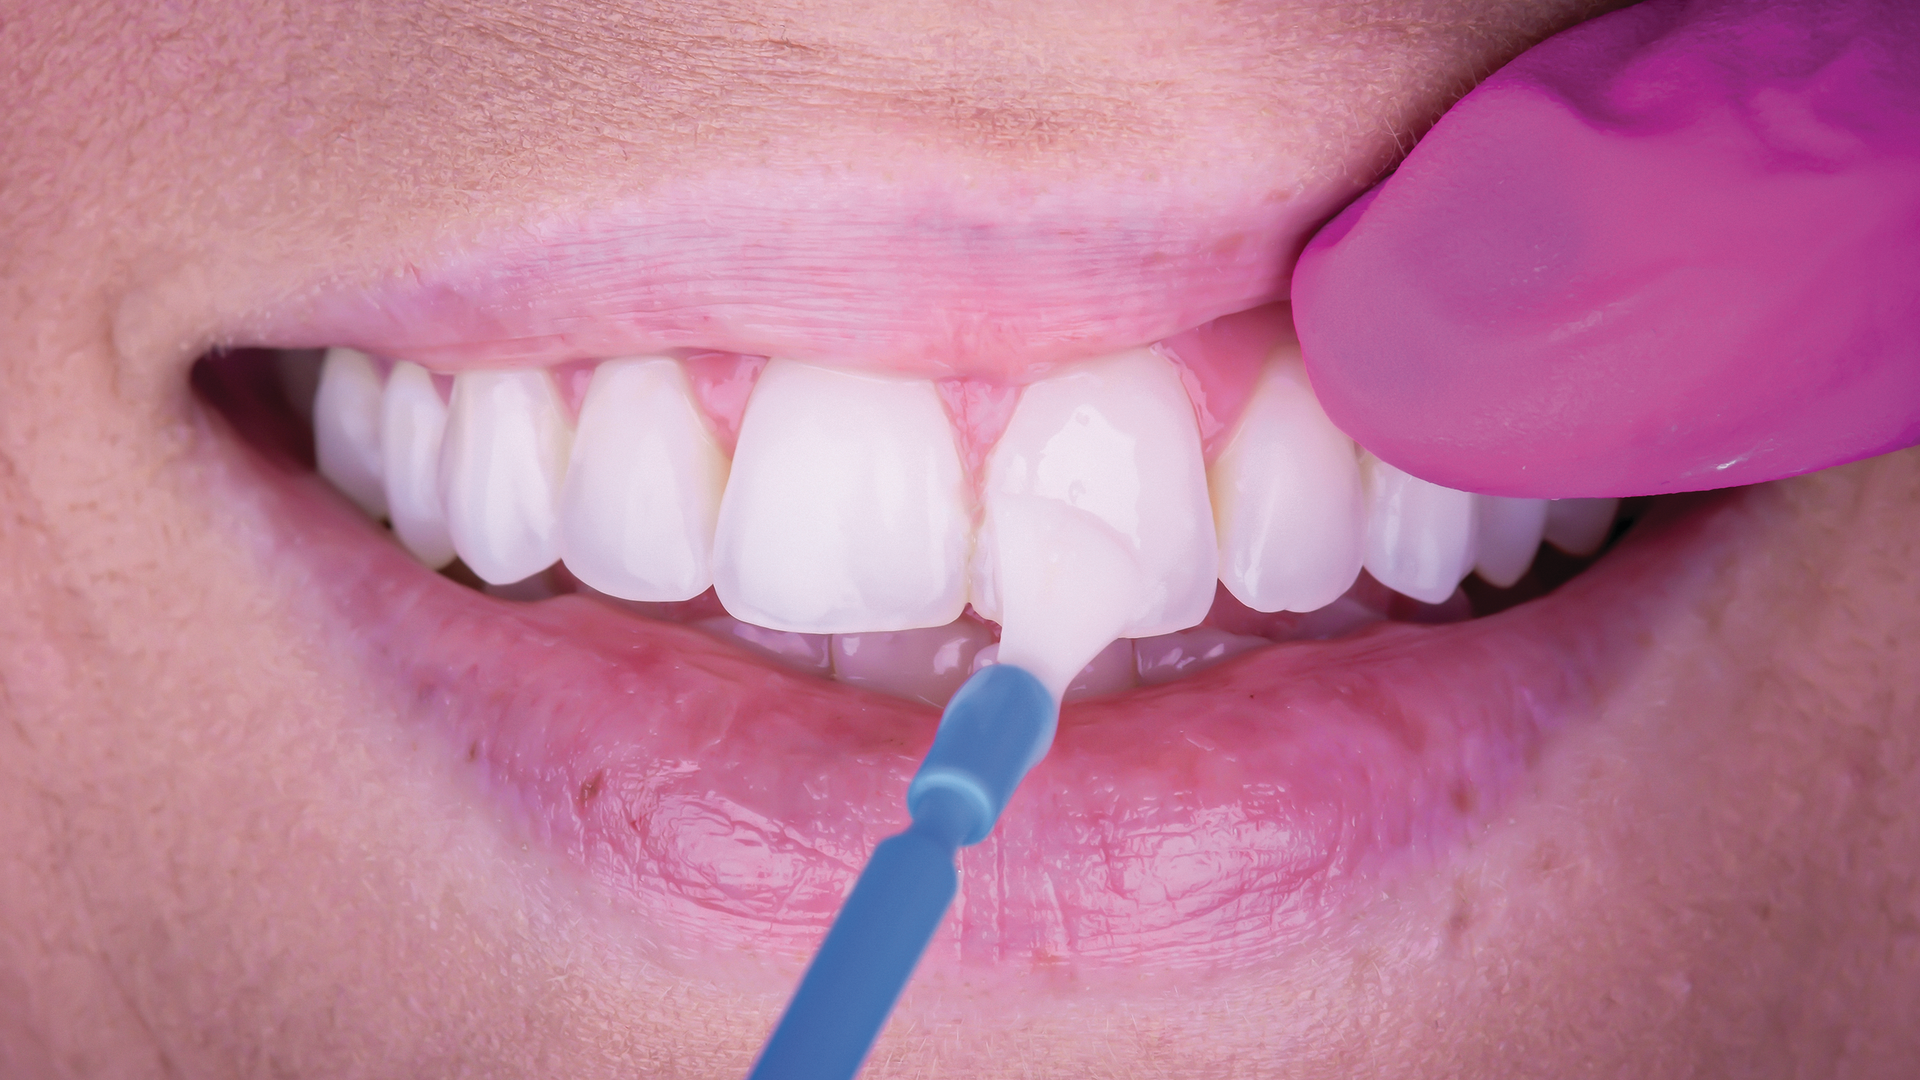 Fluoride varnishes: What is the difference, and which one is best? | Dental Economics